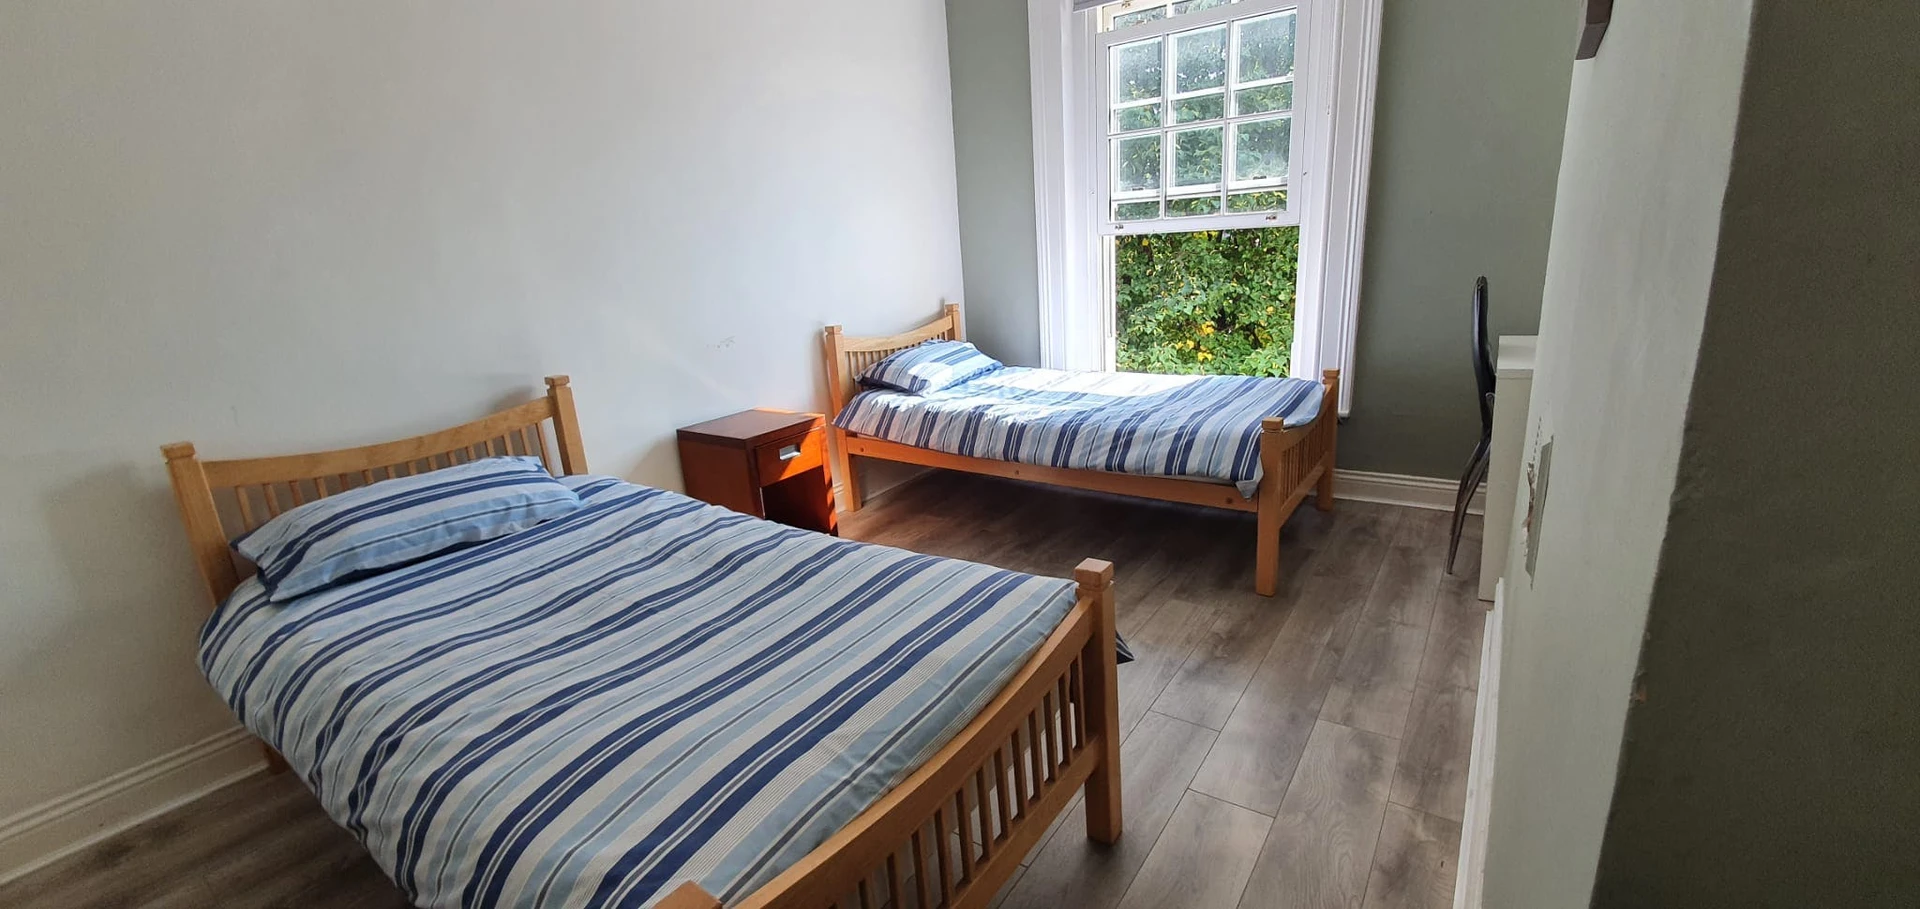 Bright shared room for rent in Dublin